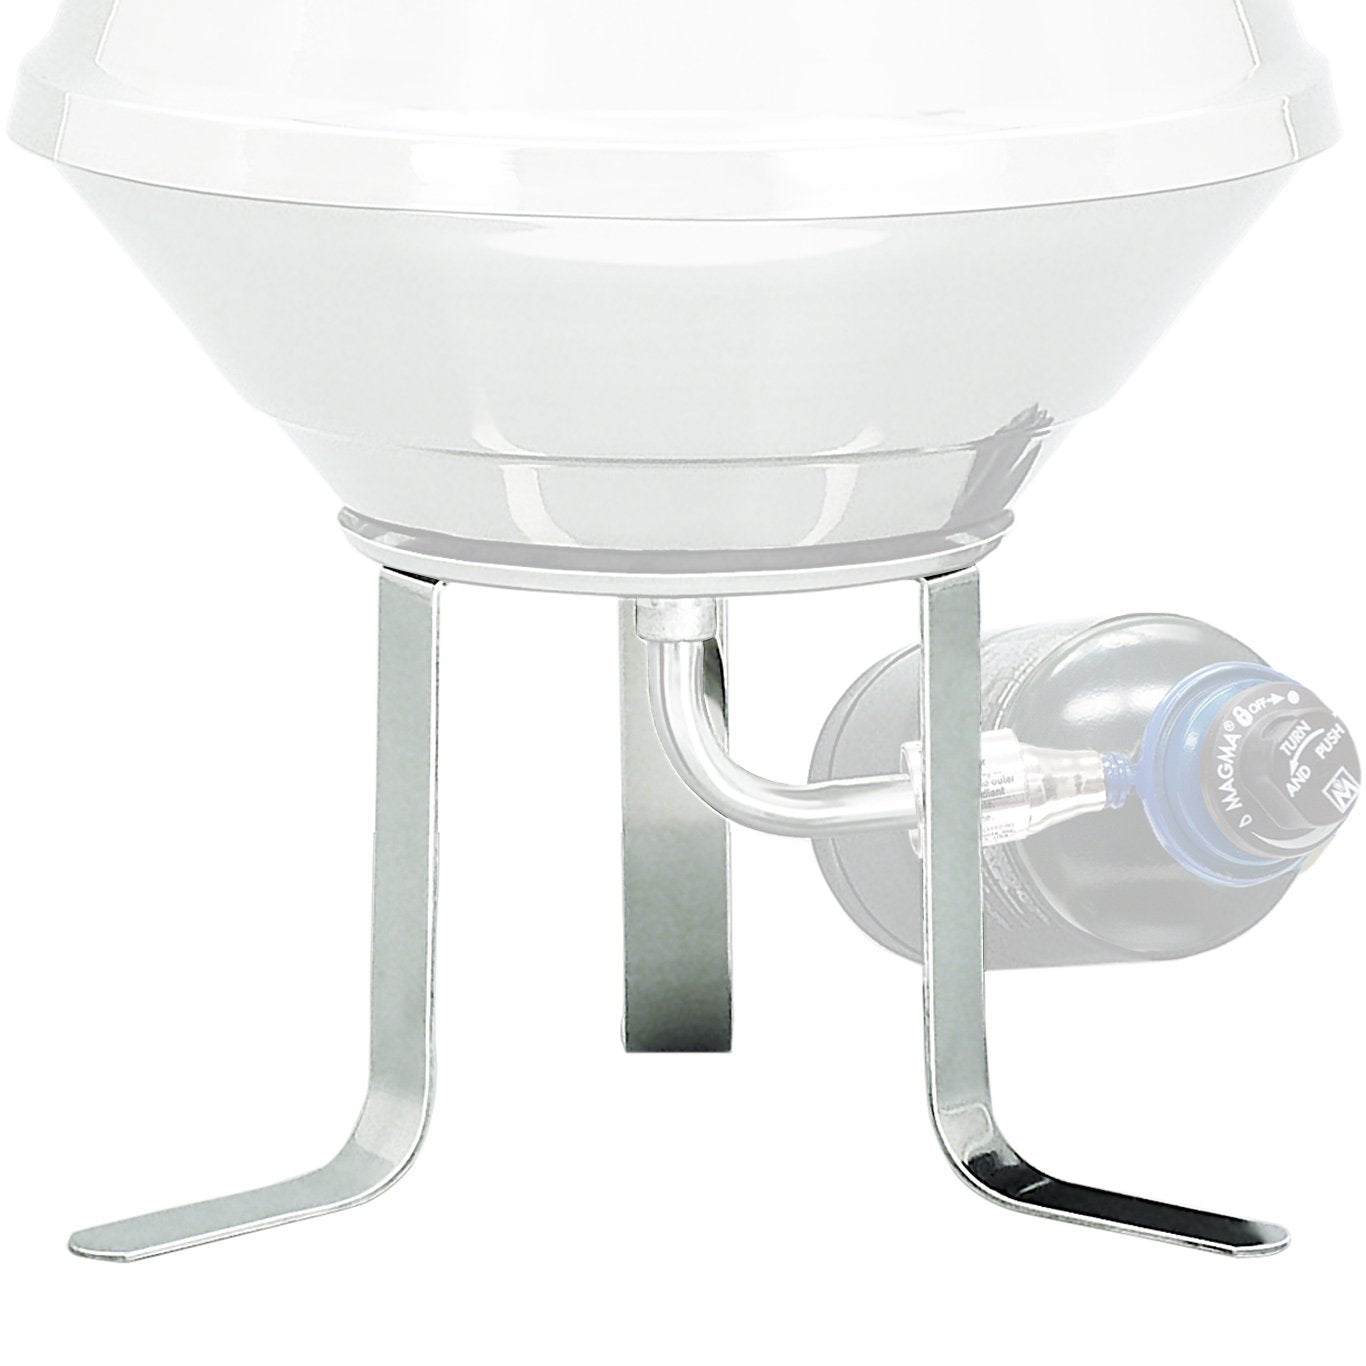 Magma Support sur porte-cannes pour barbecue Marine Kettle 410025